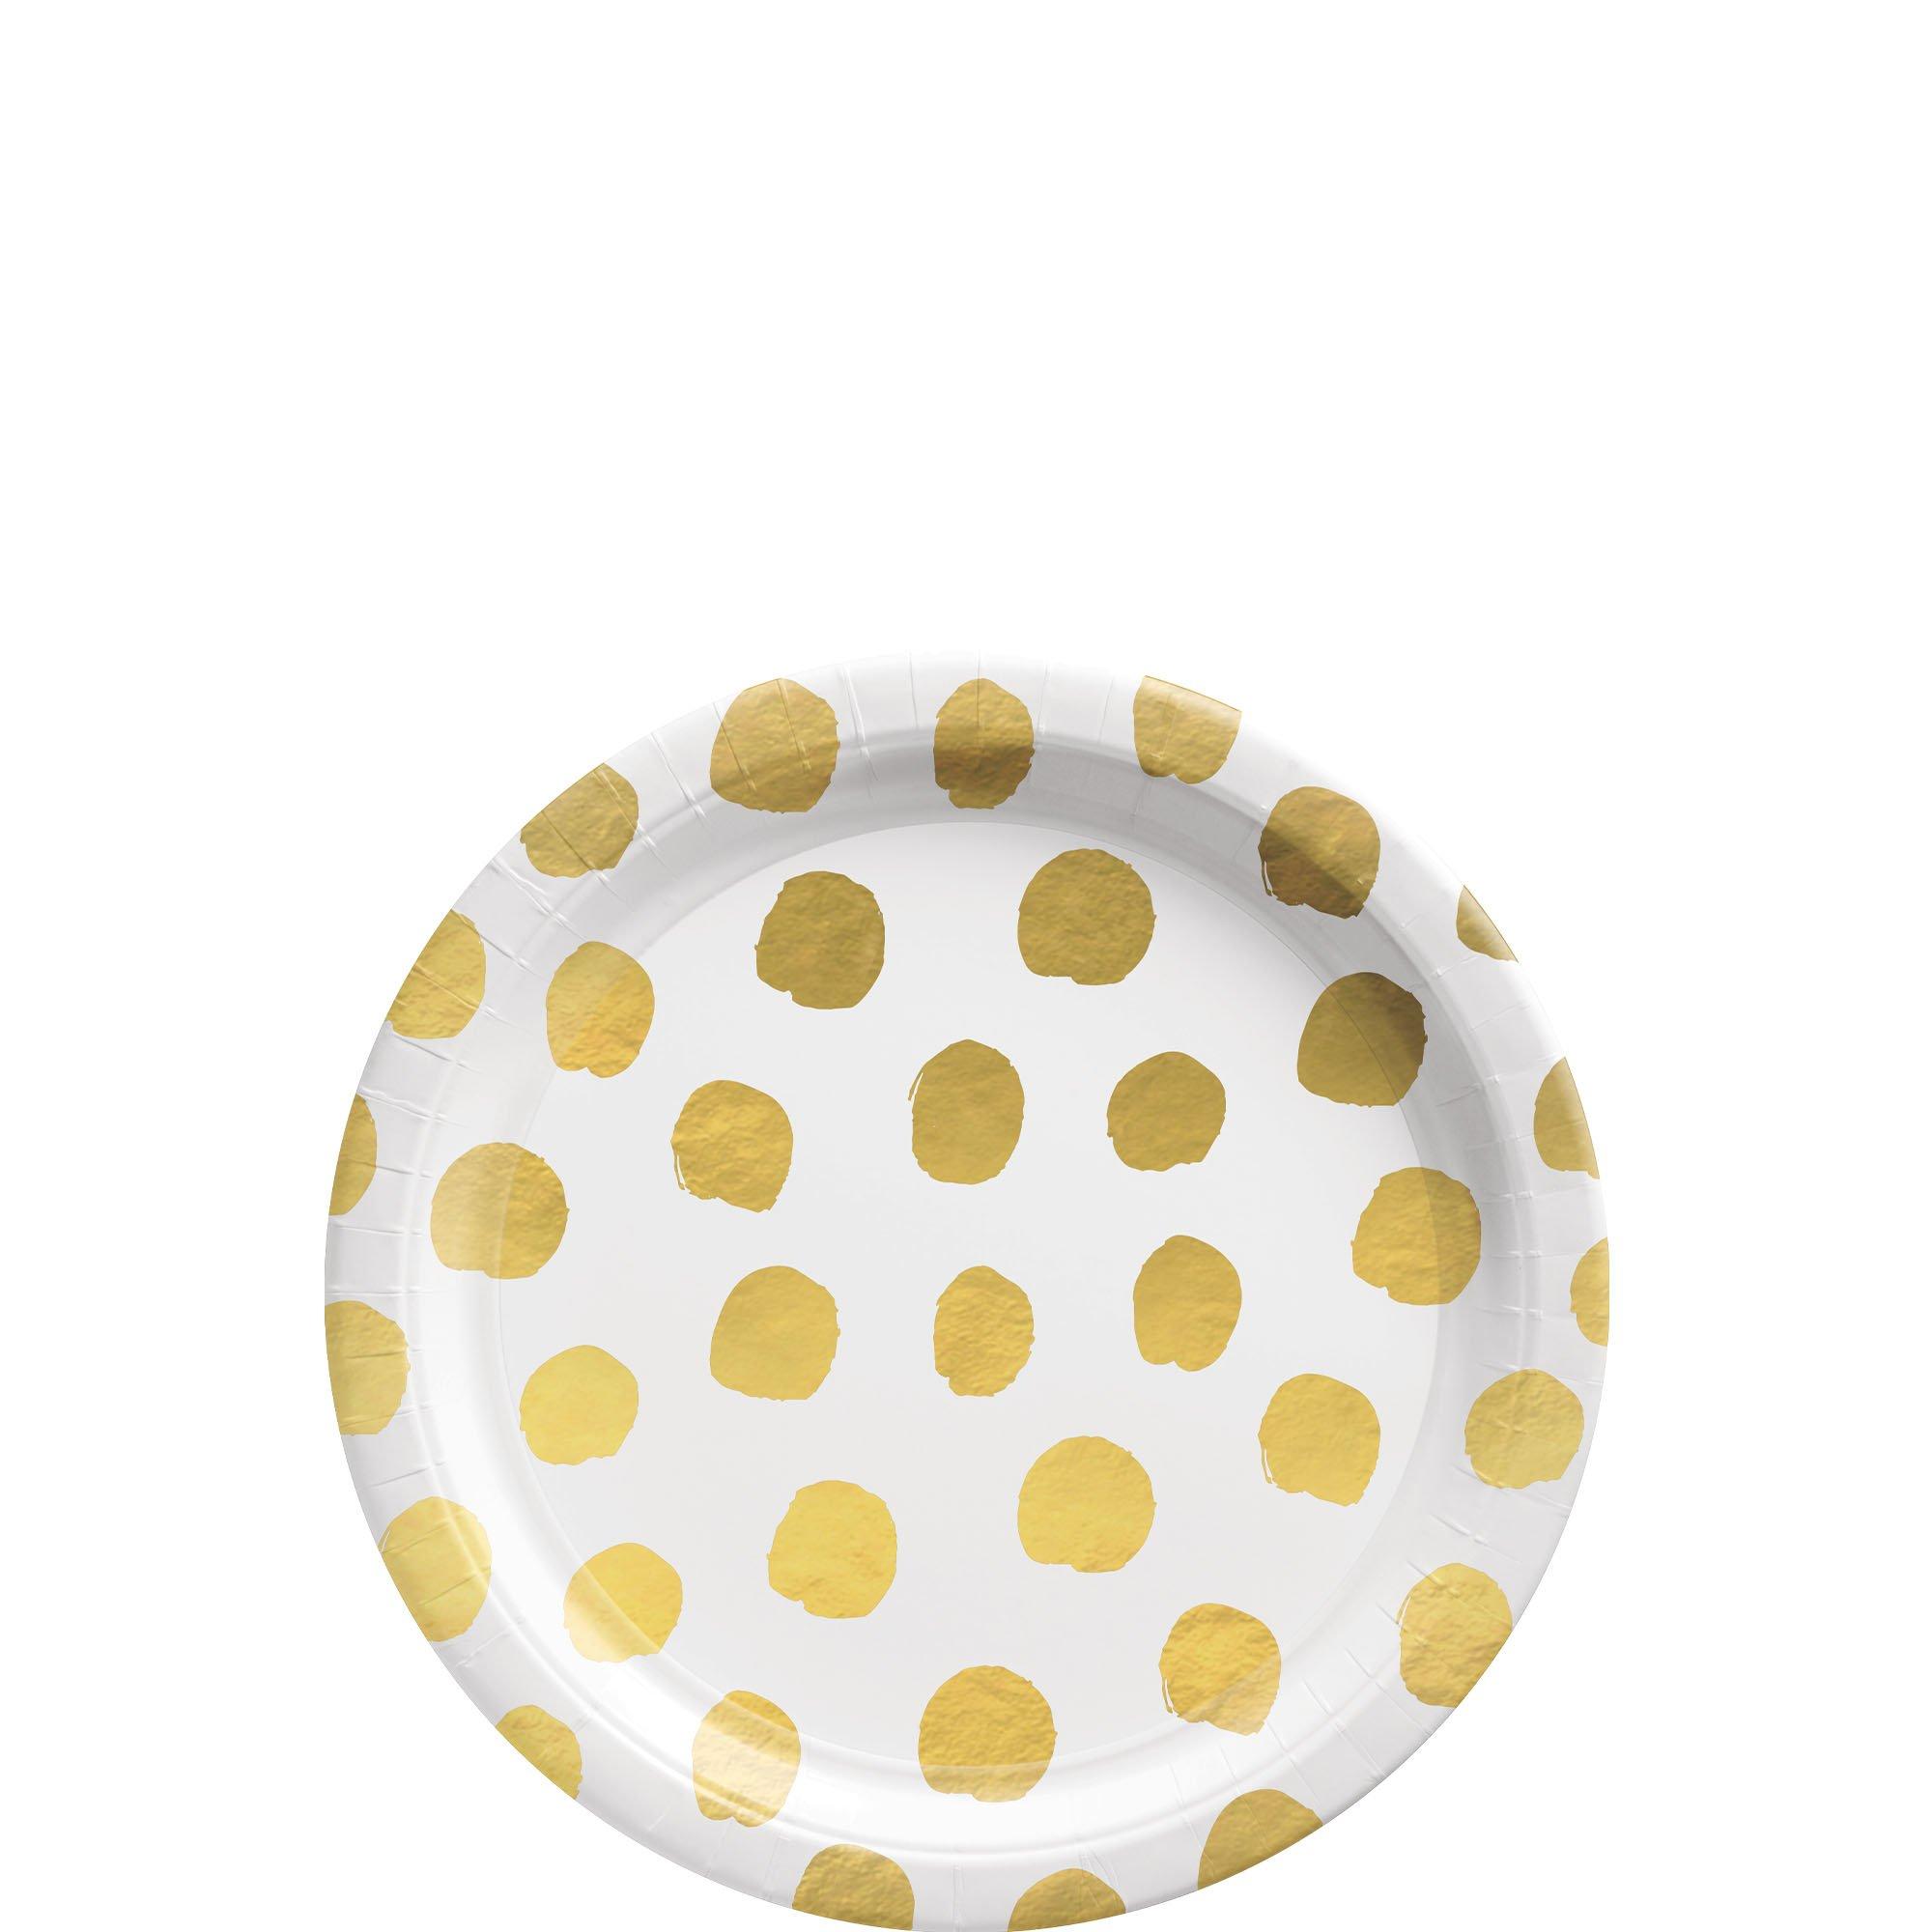 10pcs Disposable Gold Foil Polka Dot Design Thick Paper Plate For Dessert &  Cake, Birthday Party & Gathering